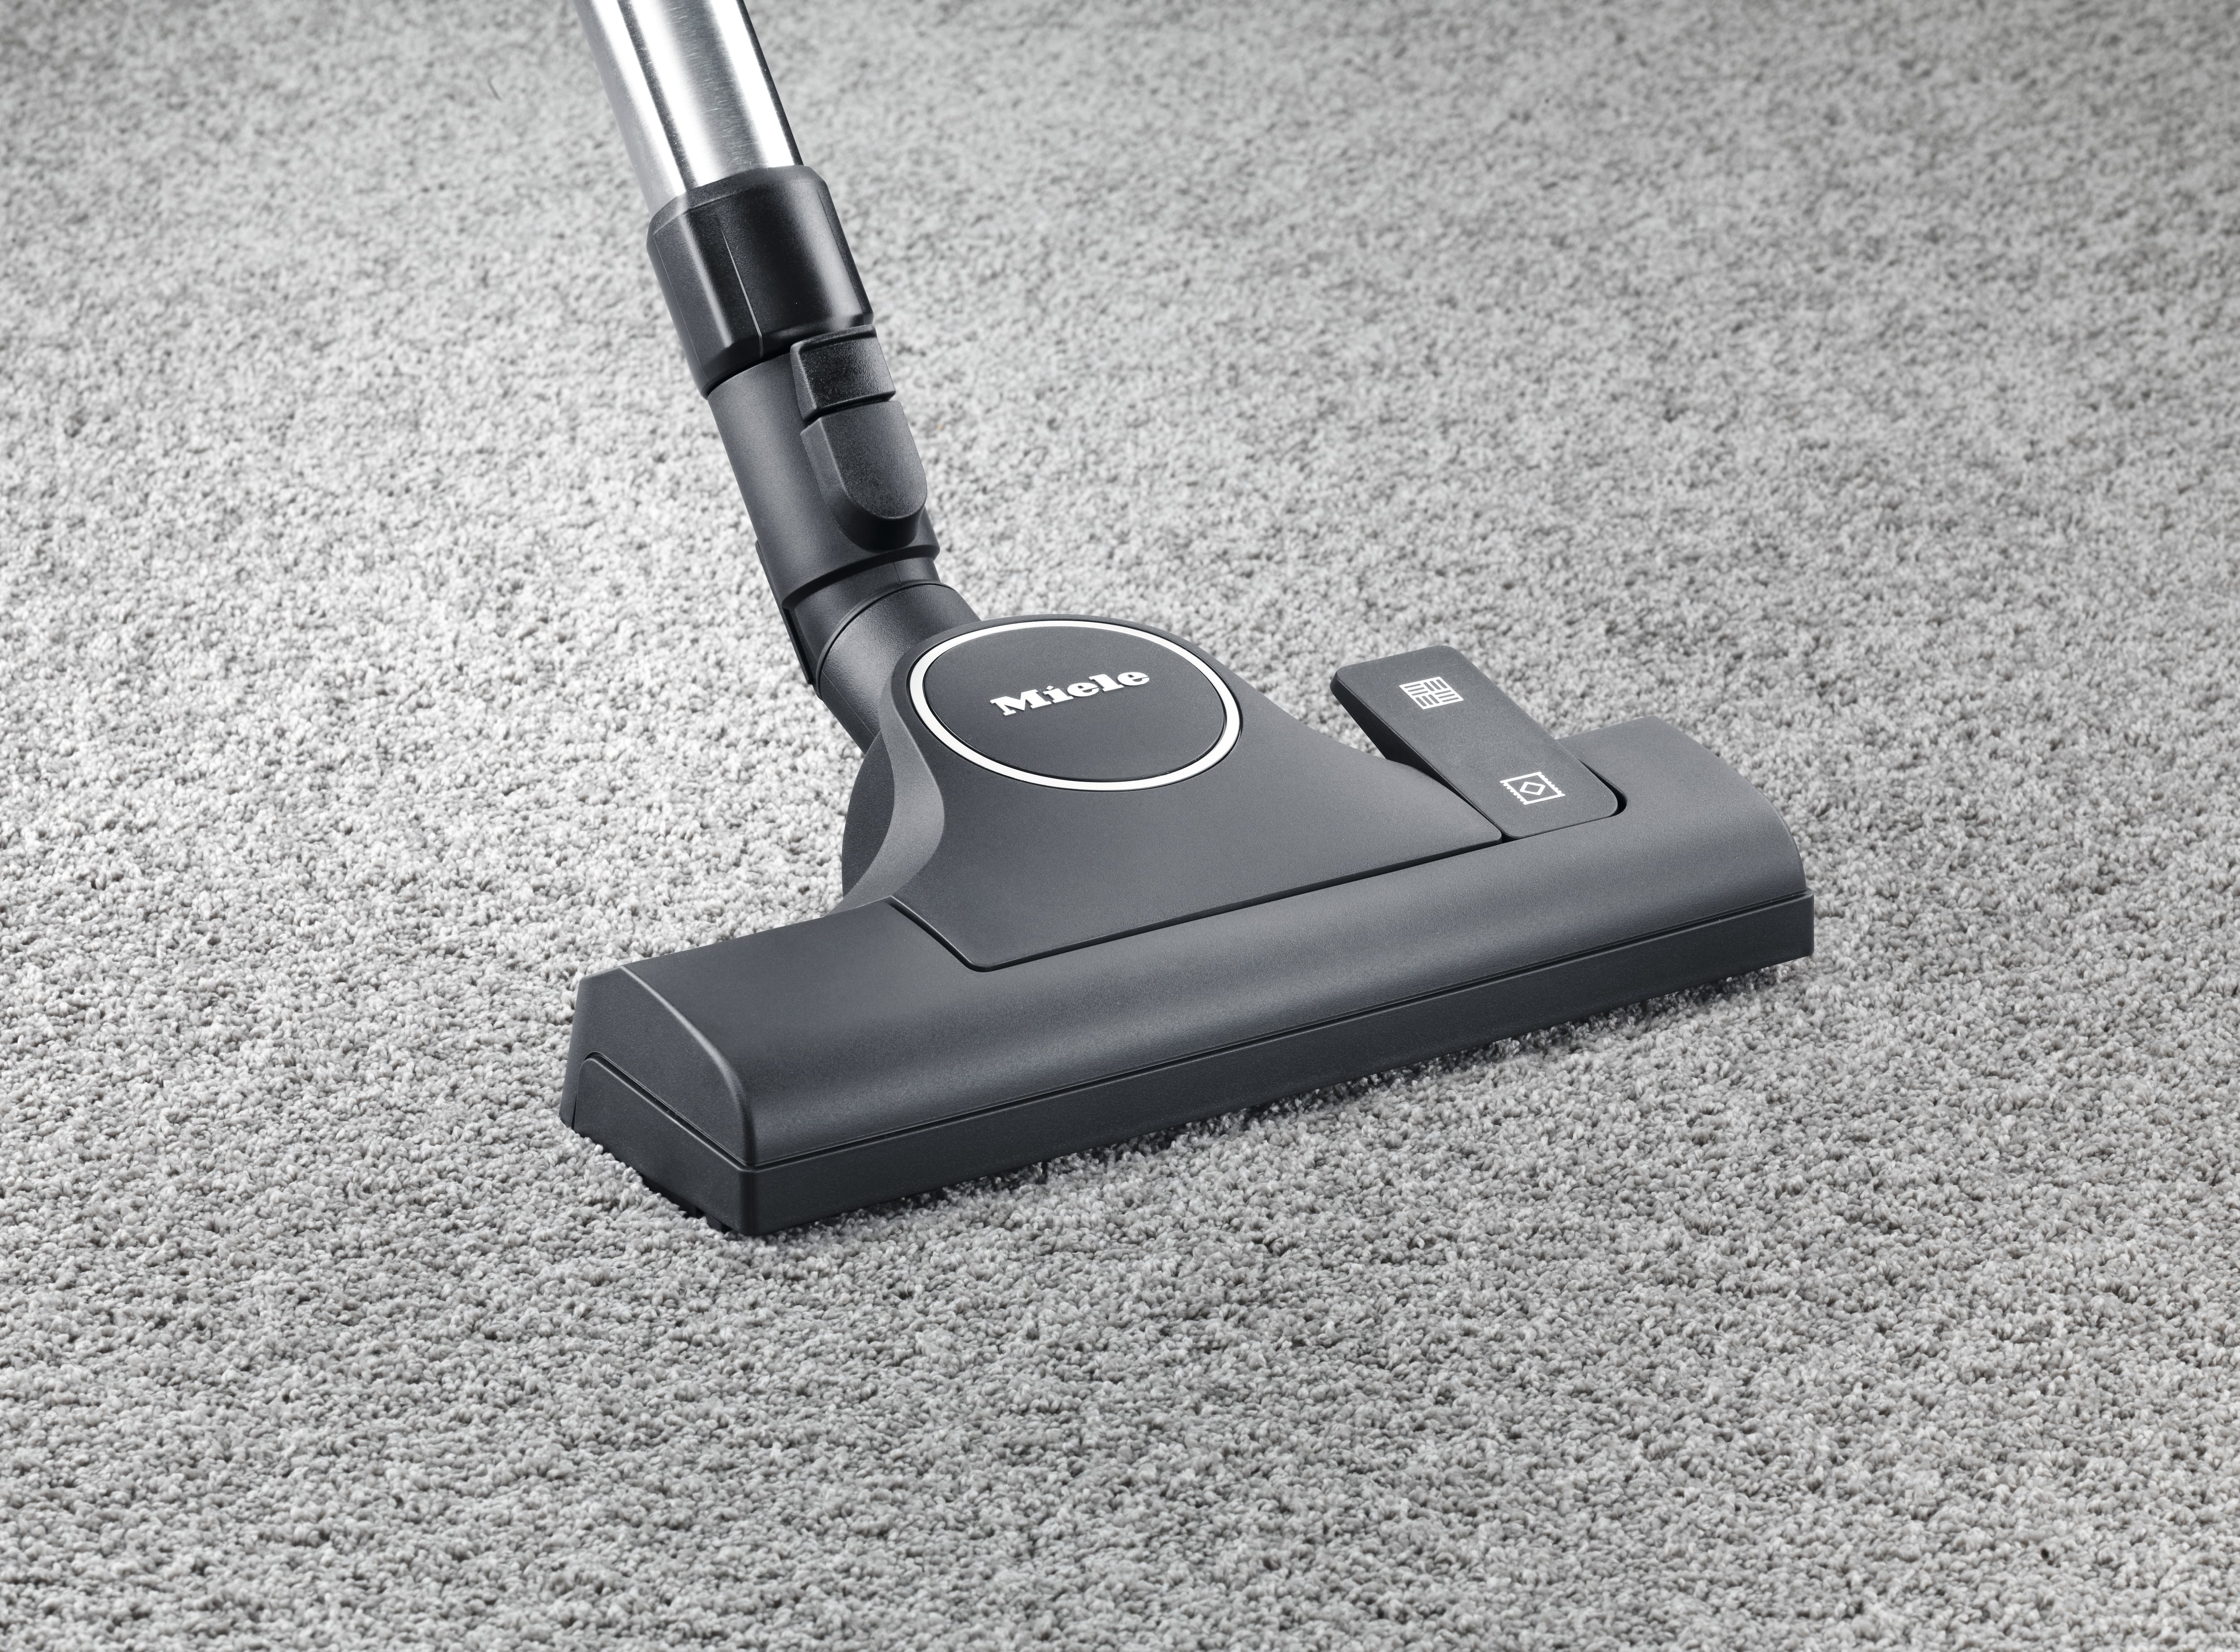 Graphite Grey Miele Classic C1 Pure Suction Canister Vacuum 